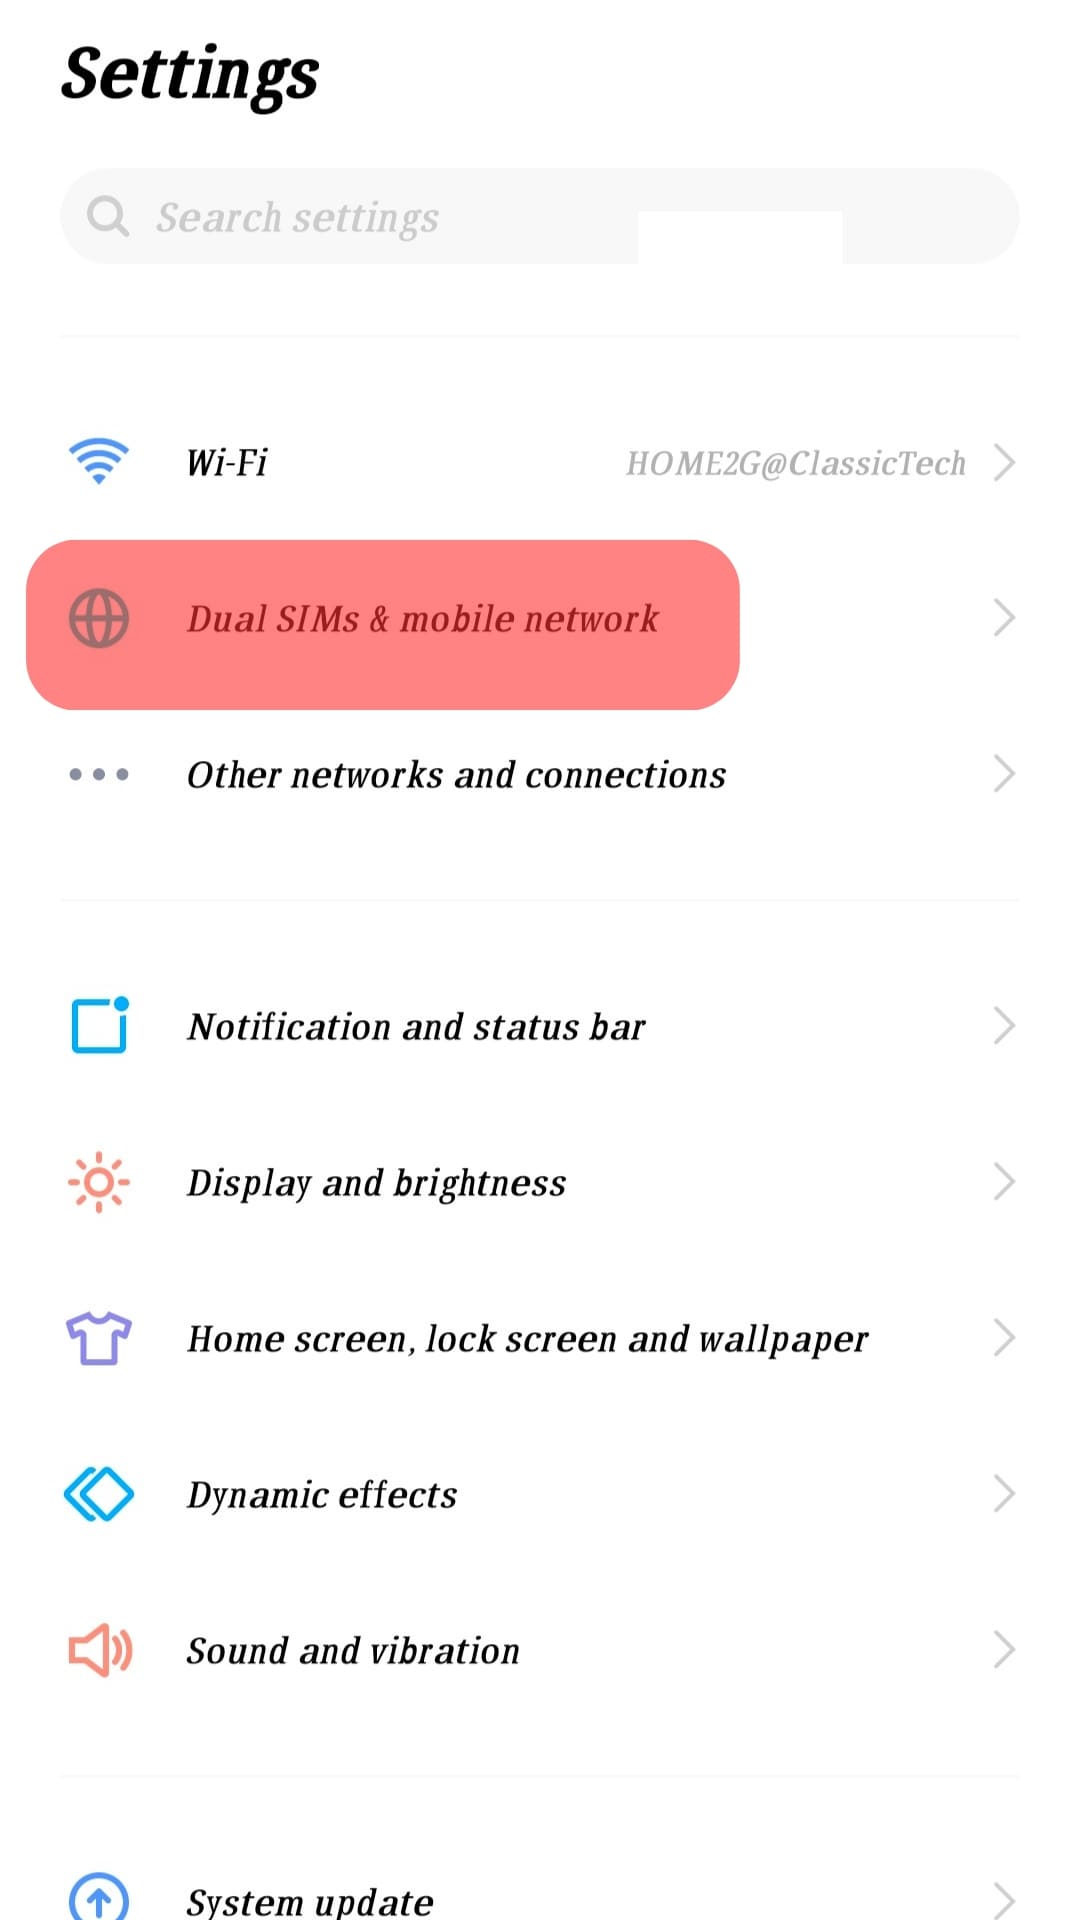 Select Mobile Network